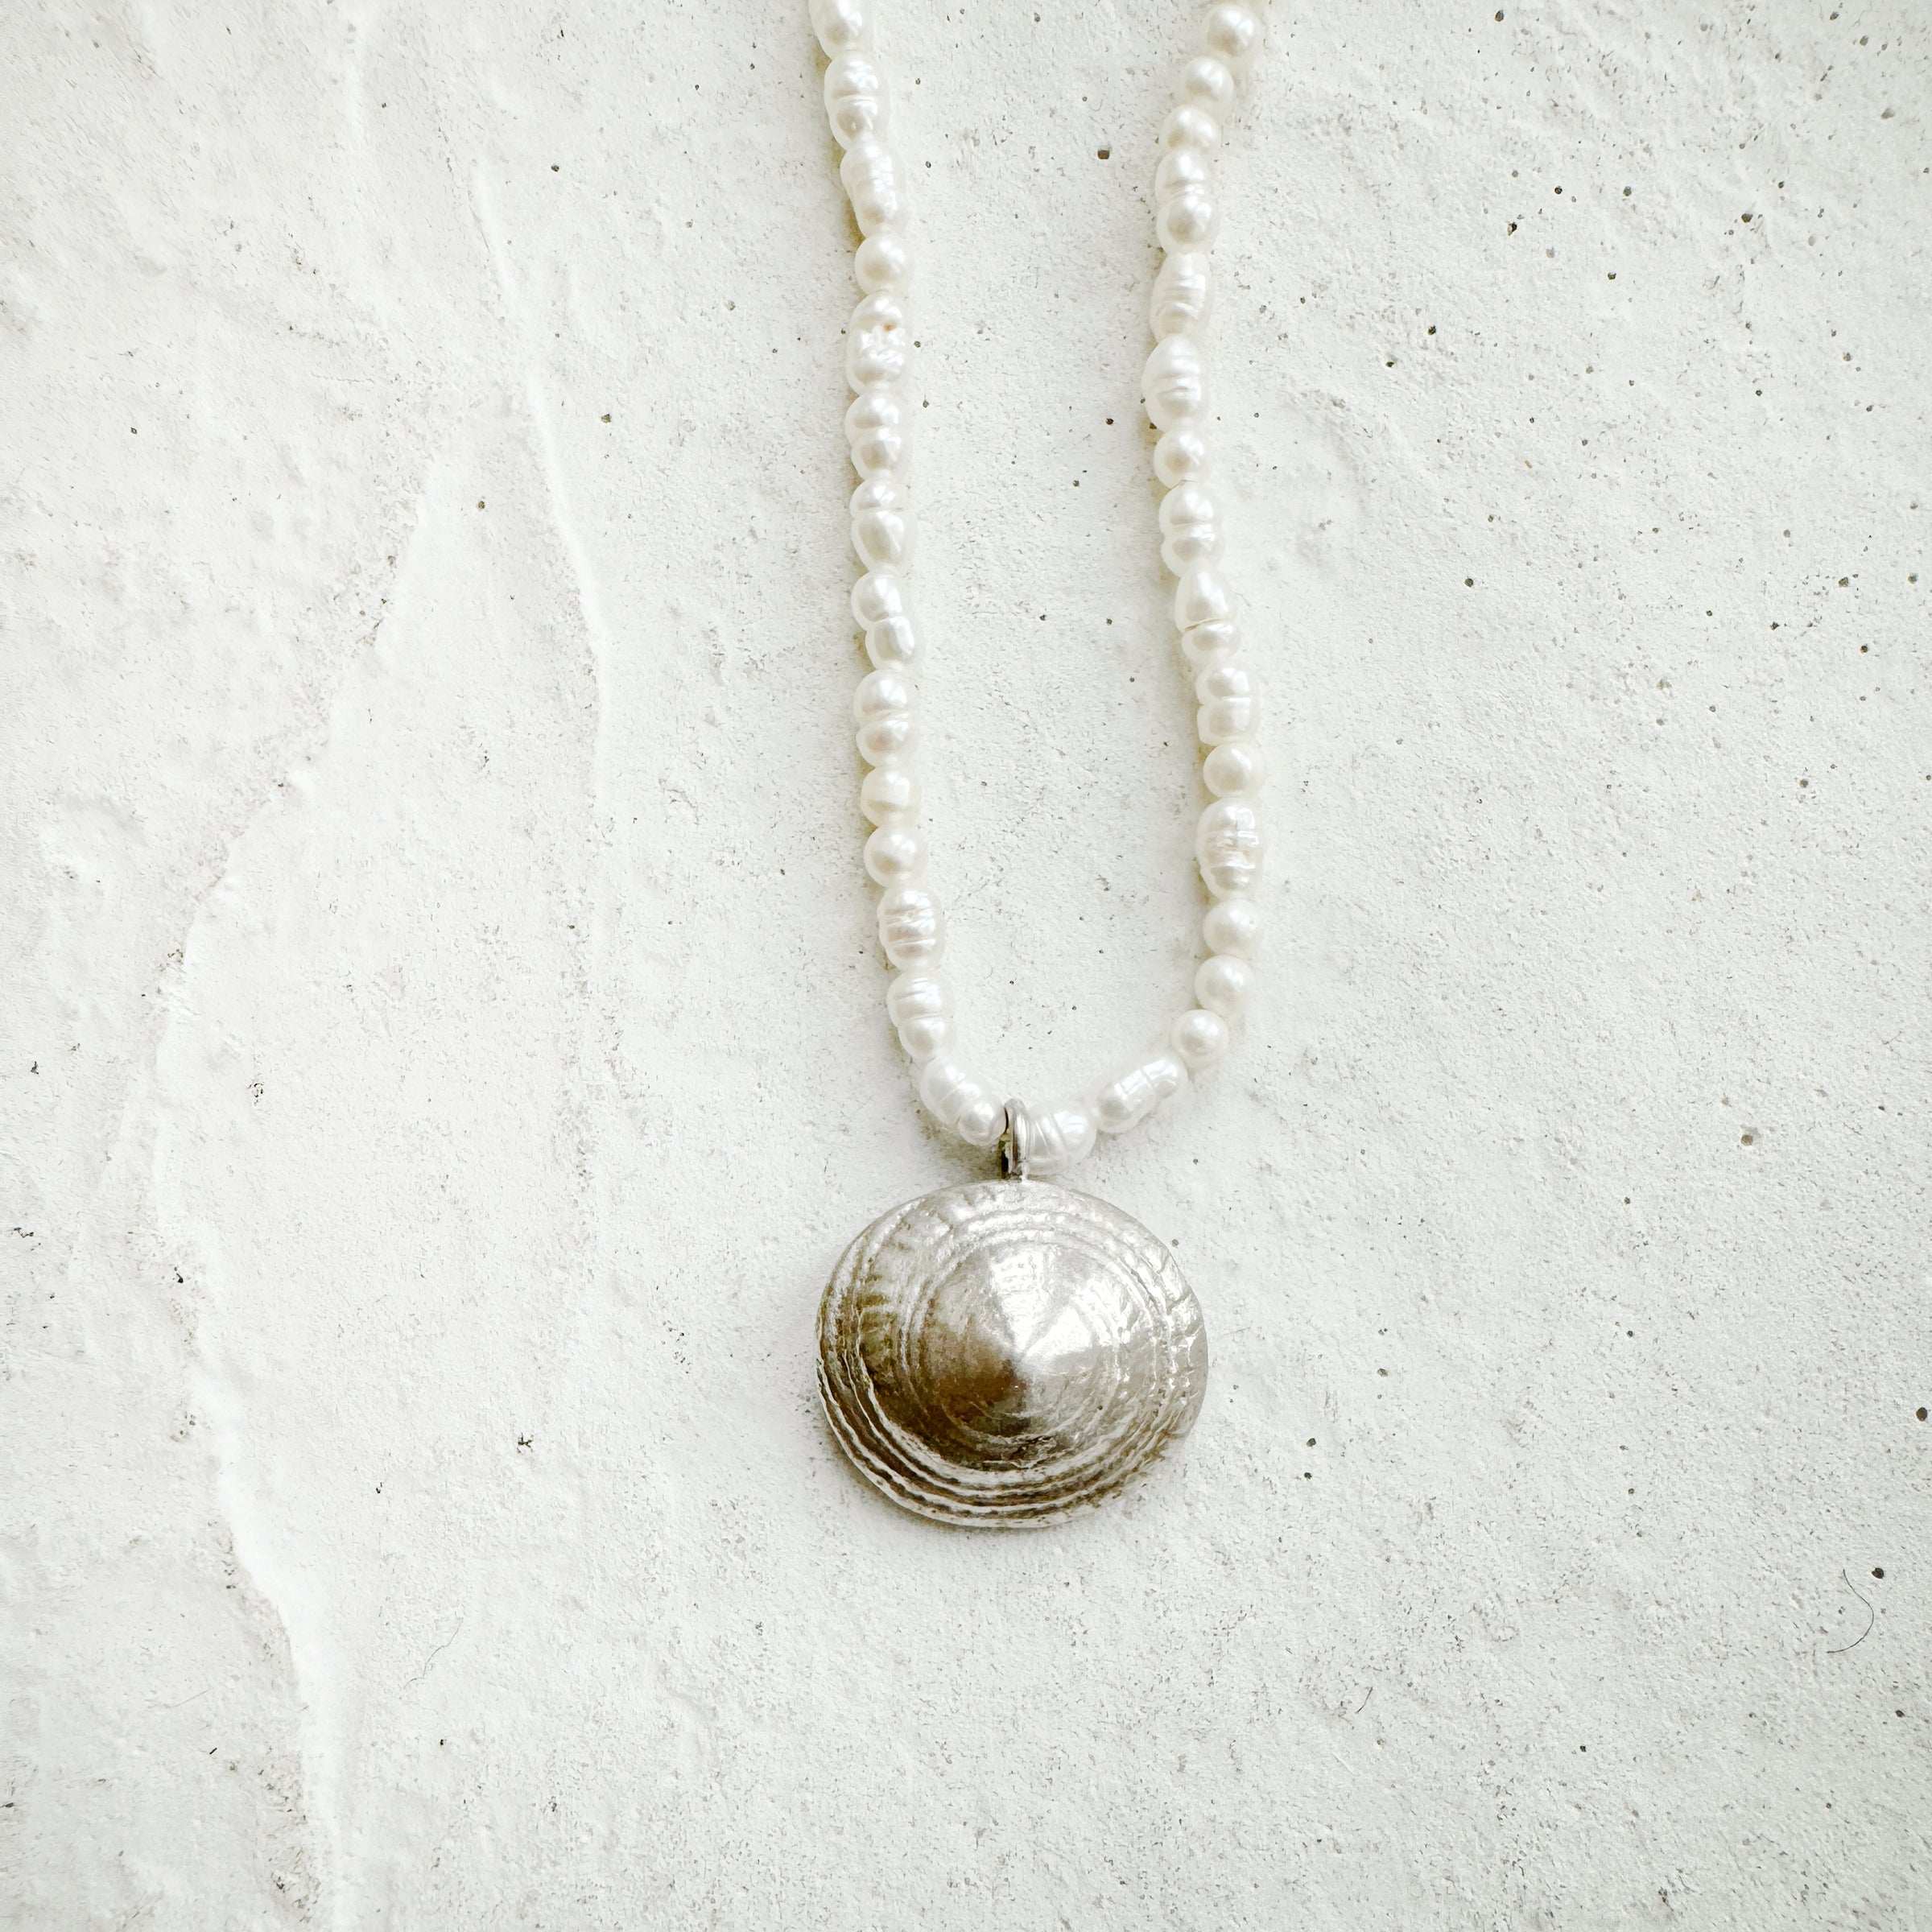 Limpet Shell necklace in Silver/Pearls